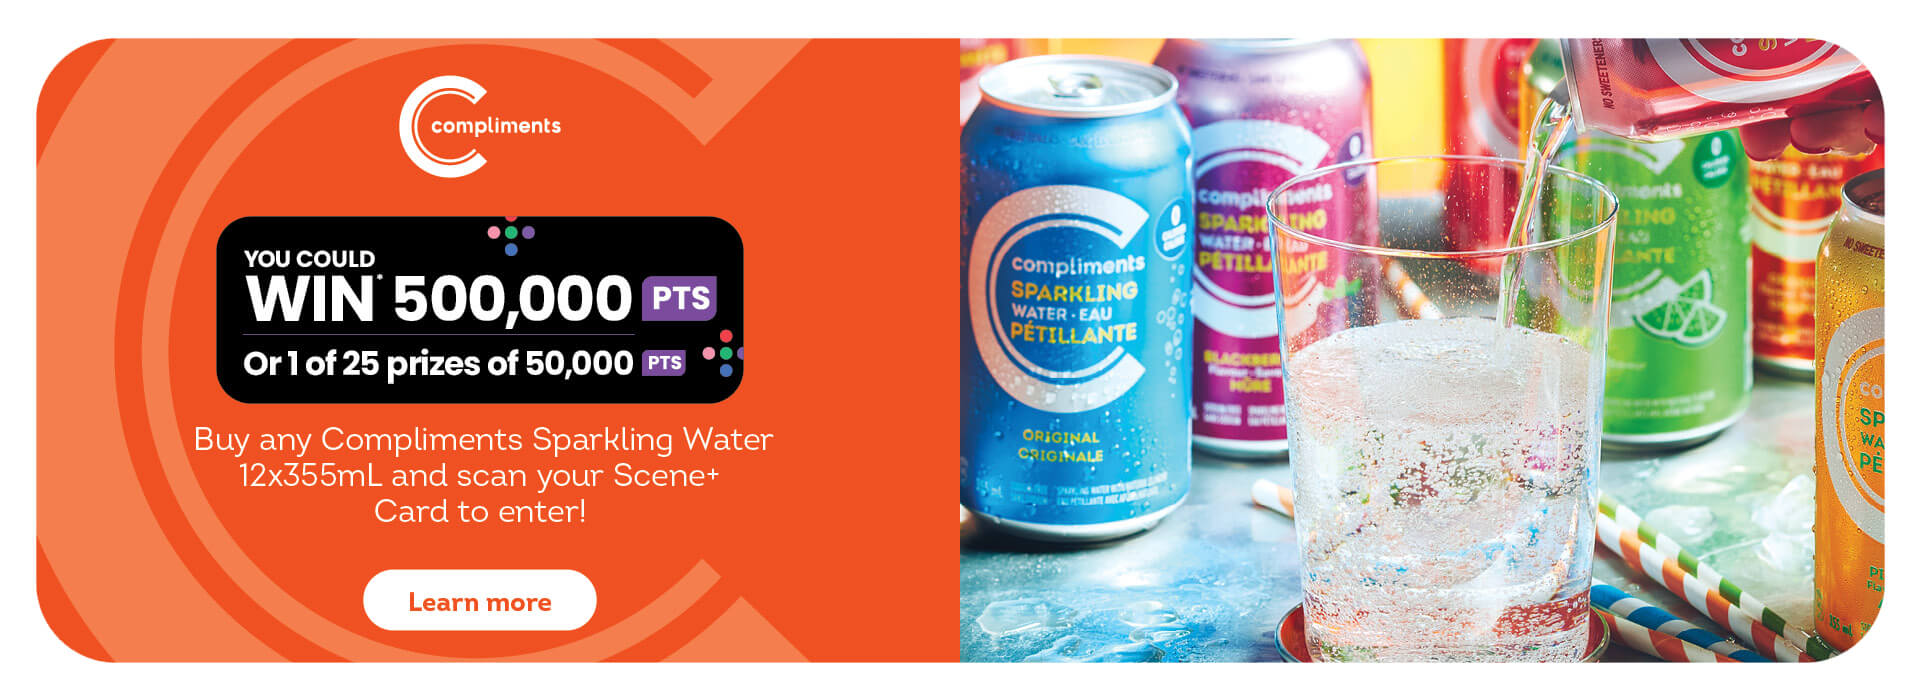 Sparkling Water contest